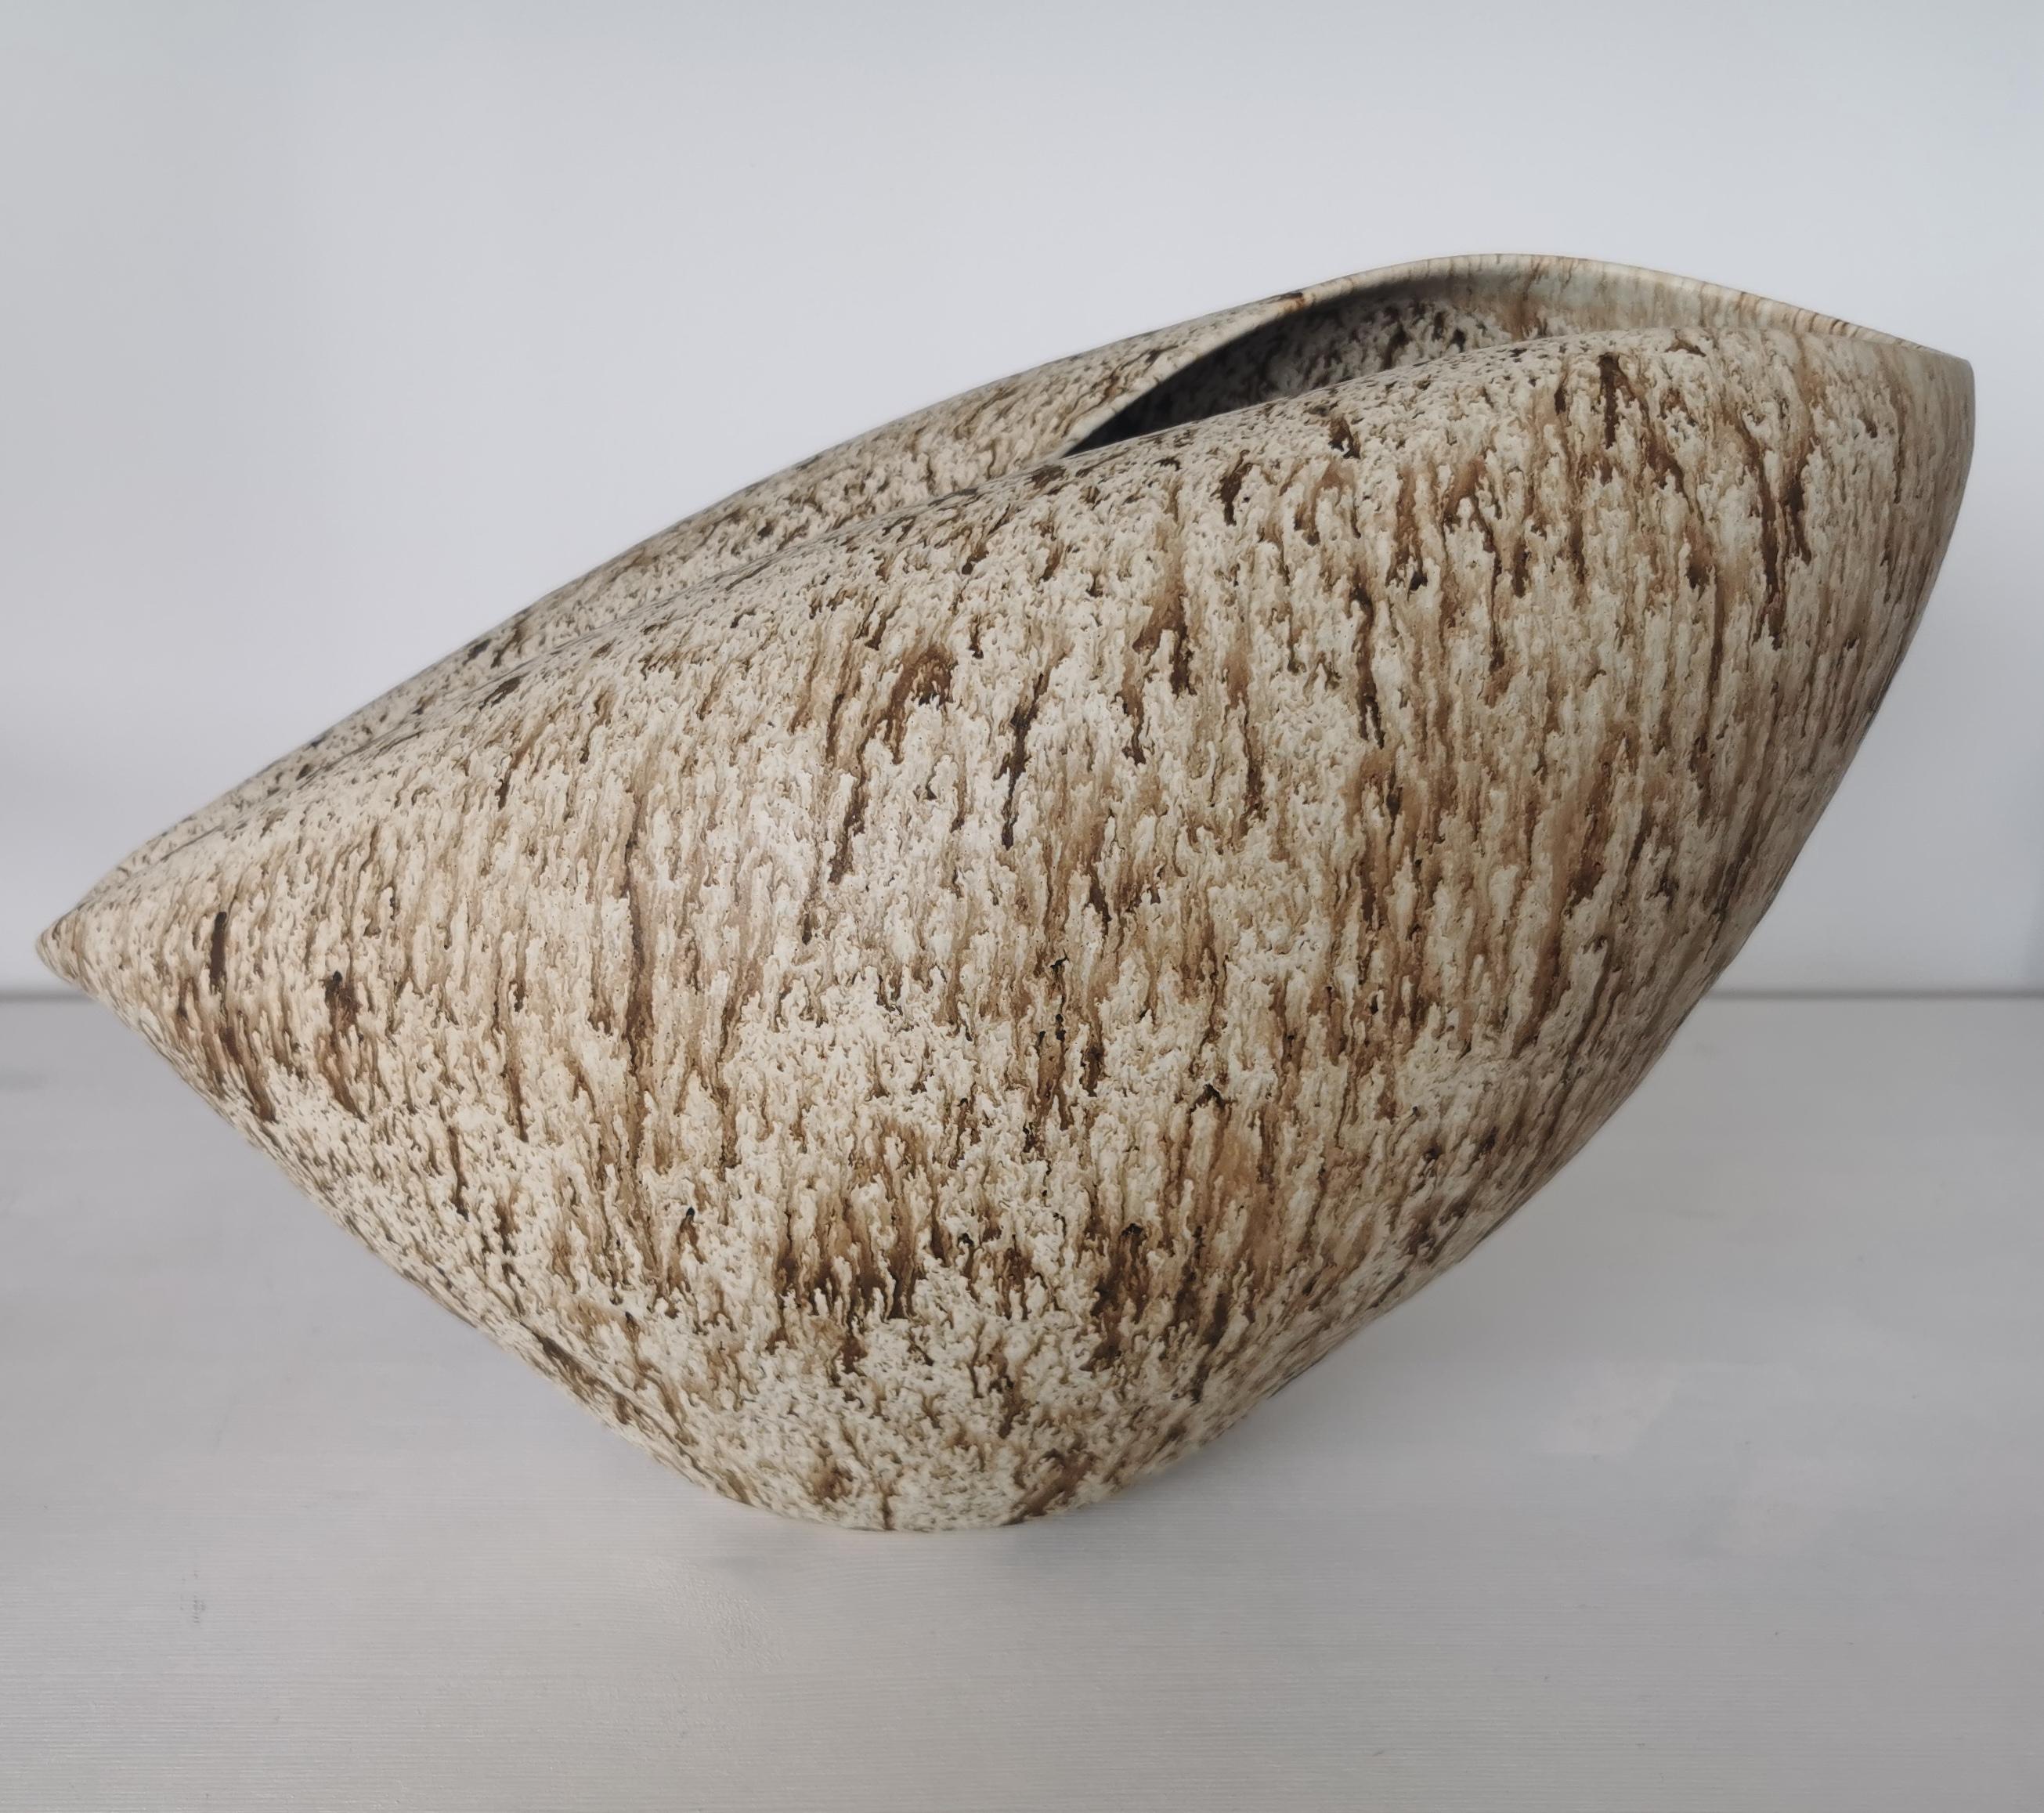 Spanish Oval Form with White and Brown Speckled Glaze, Vessel No.99, Ceramic Sculpture For Sale